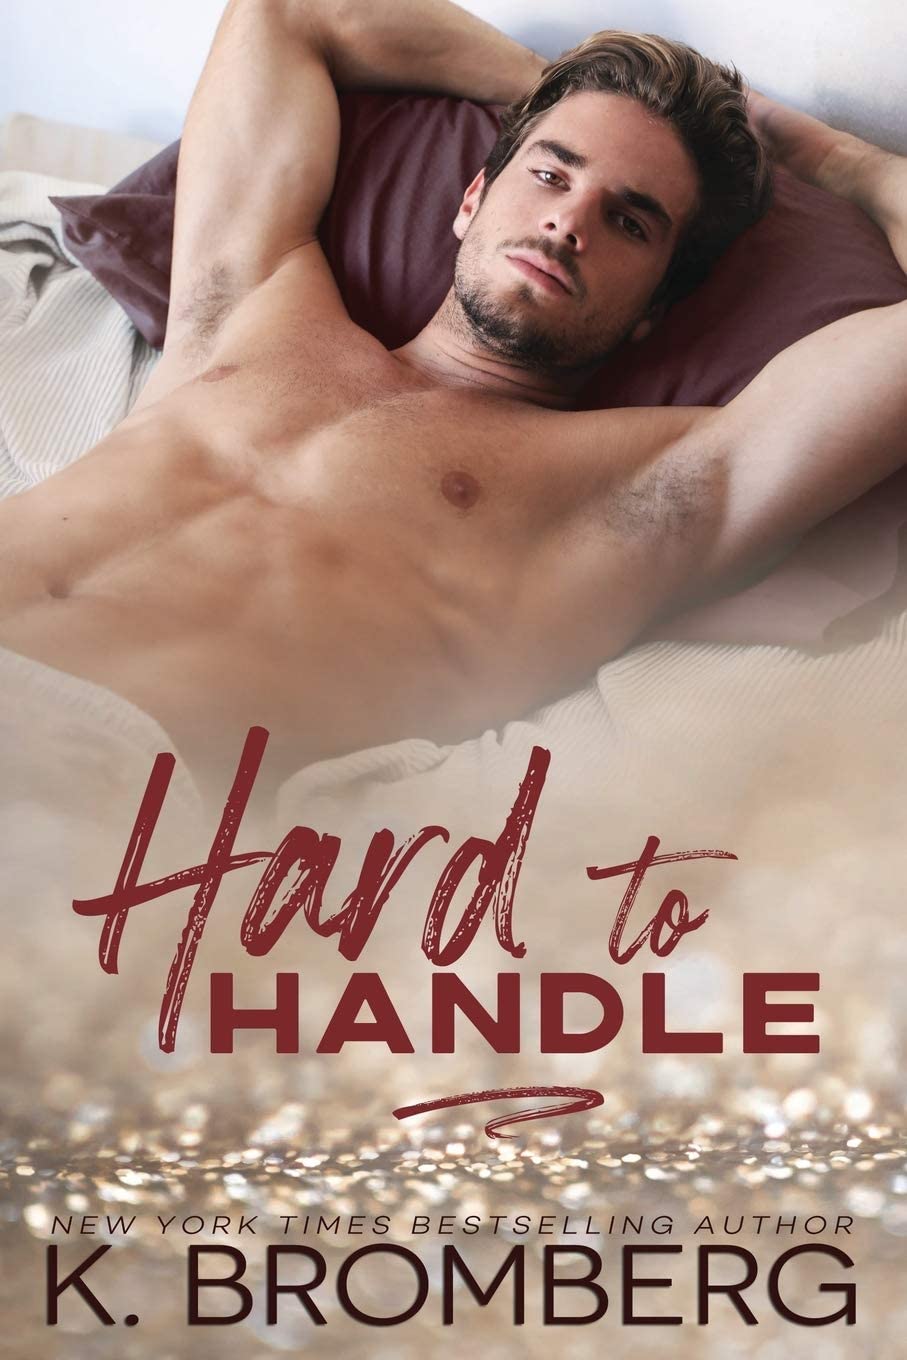 The Play Hard Series by K. Bromberg